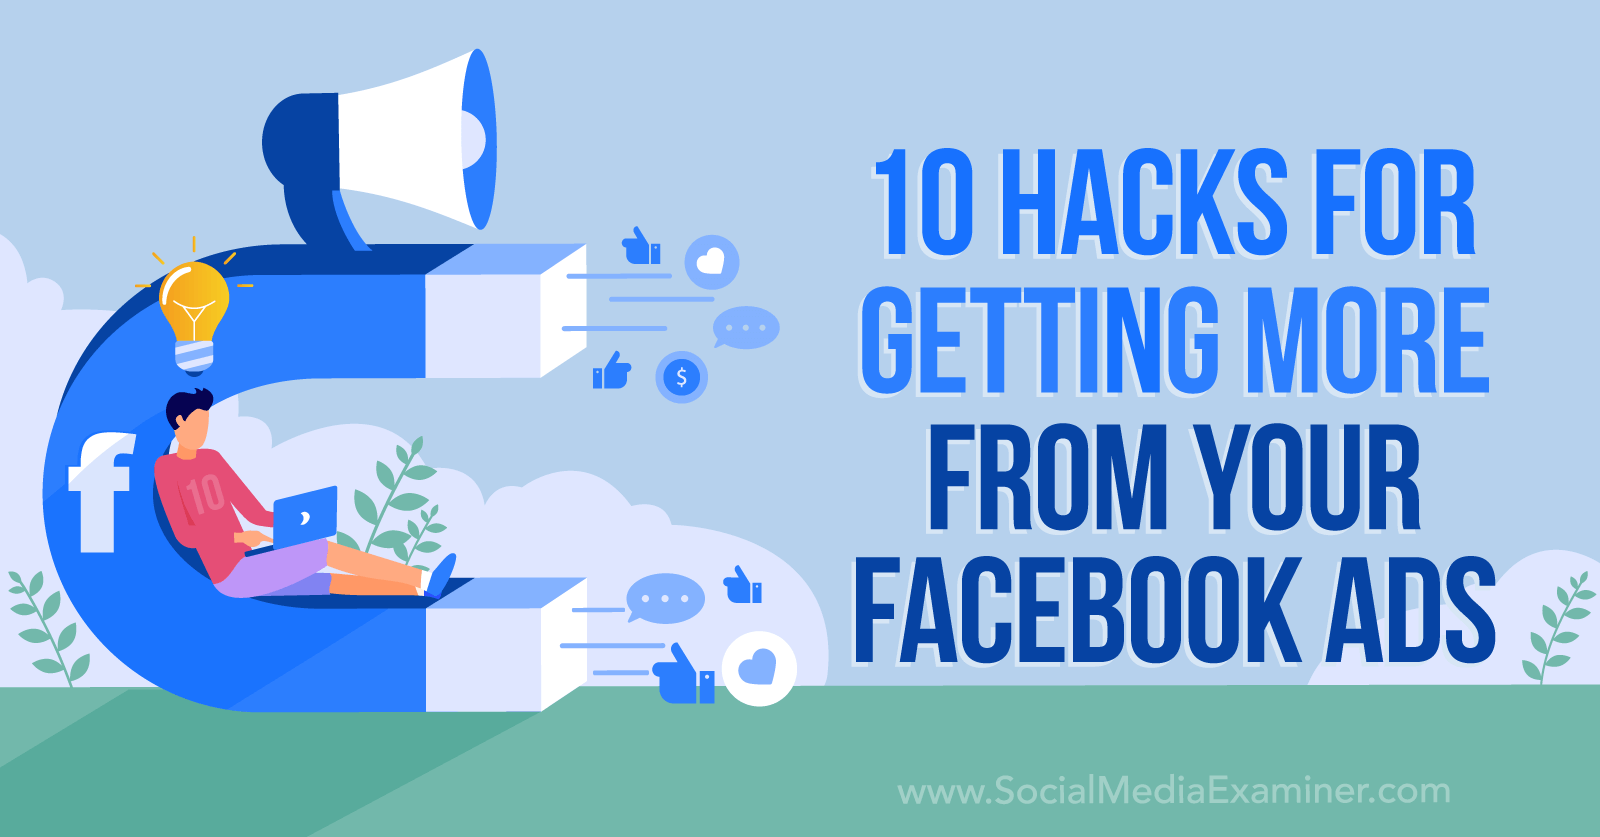 10 Hacks for Getting More From Your Facebook Ads-Social Media Examiner